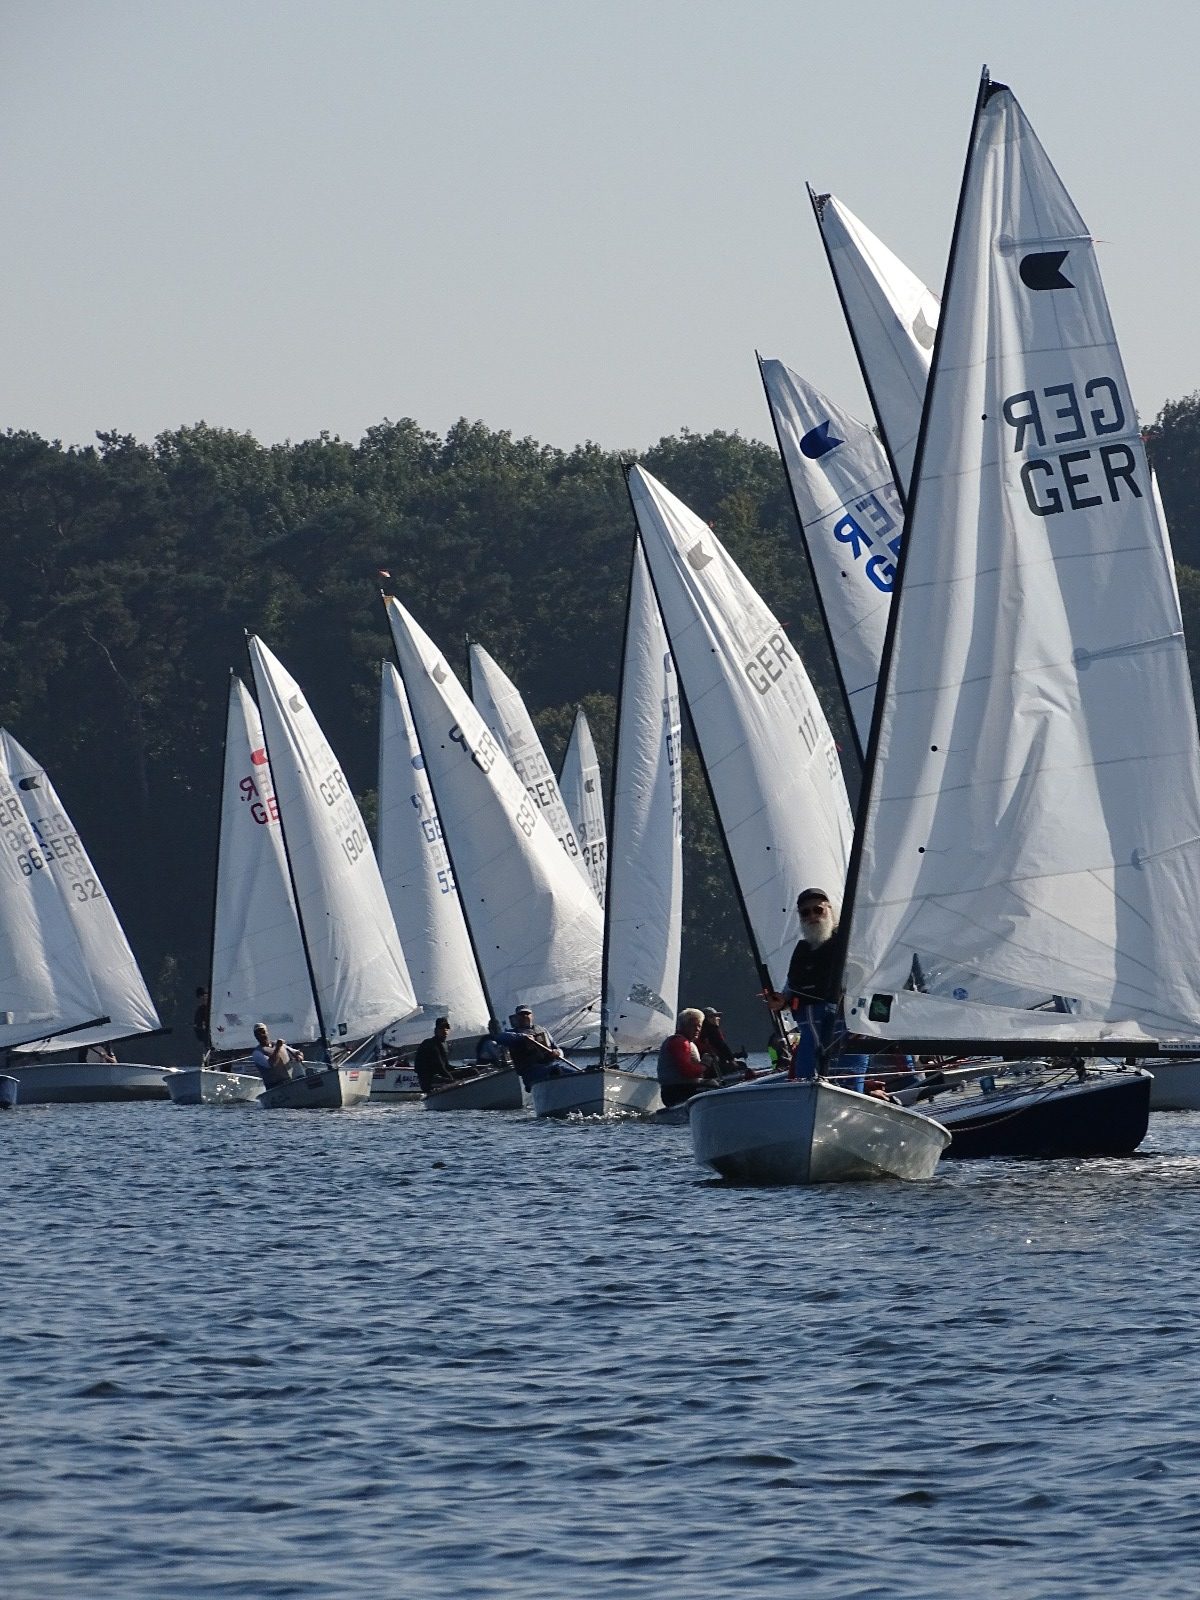 You are currently viewing Kehrausregatta 2021